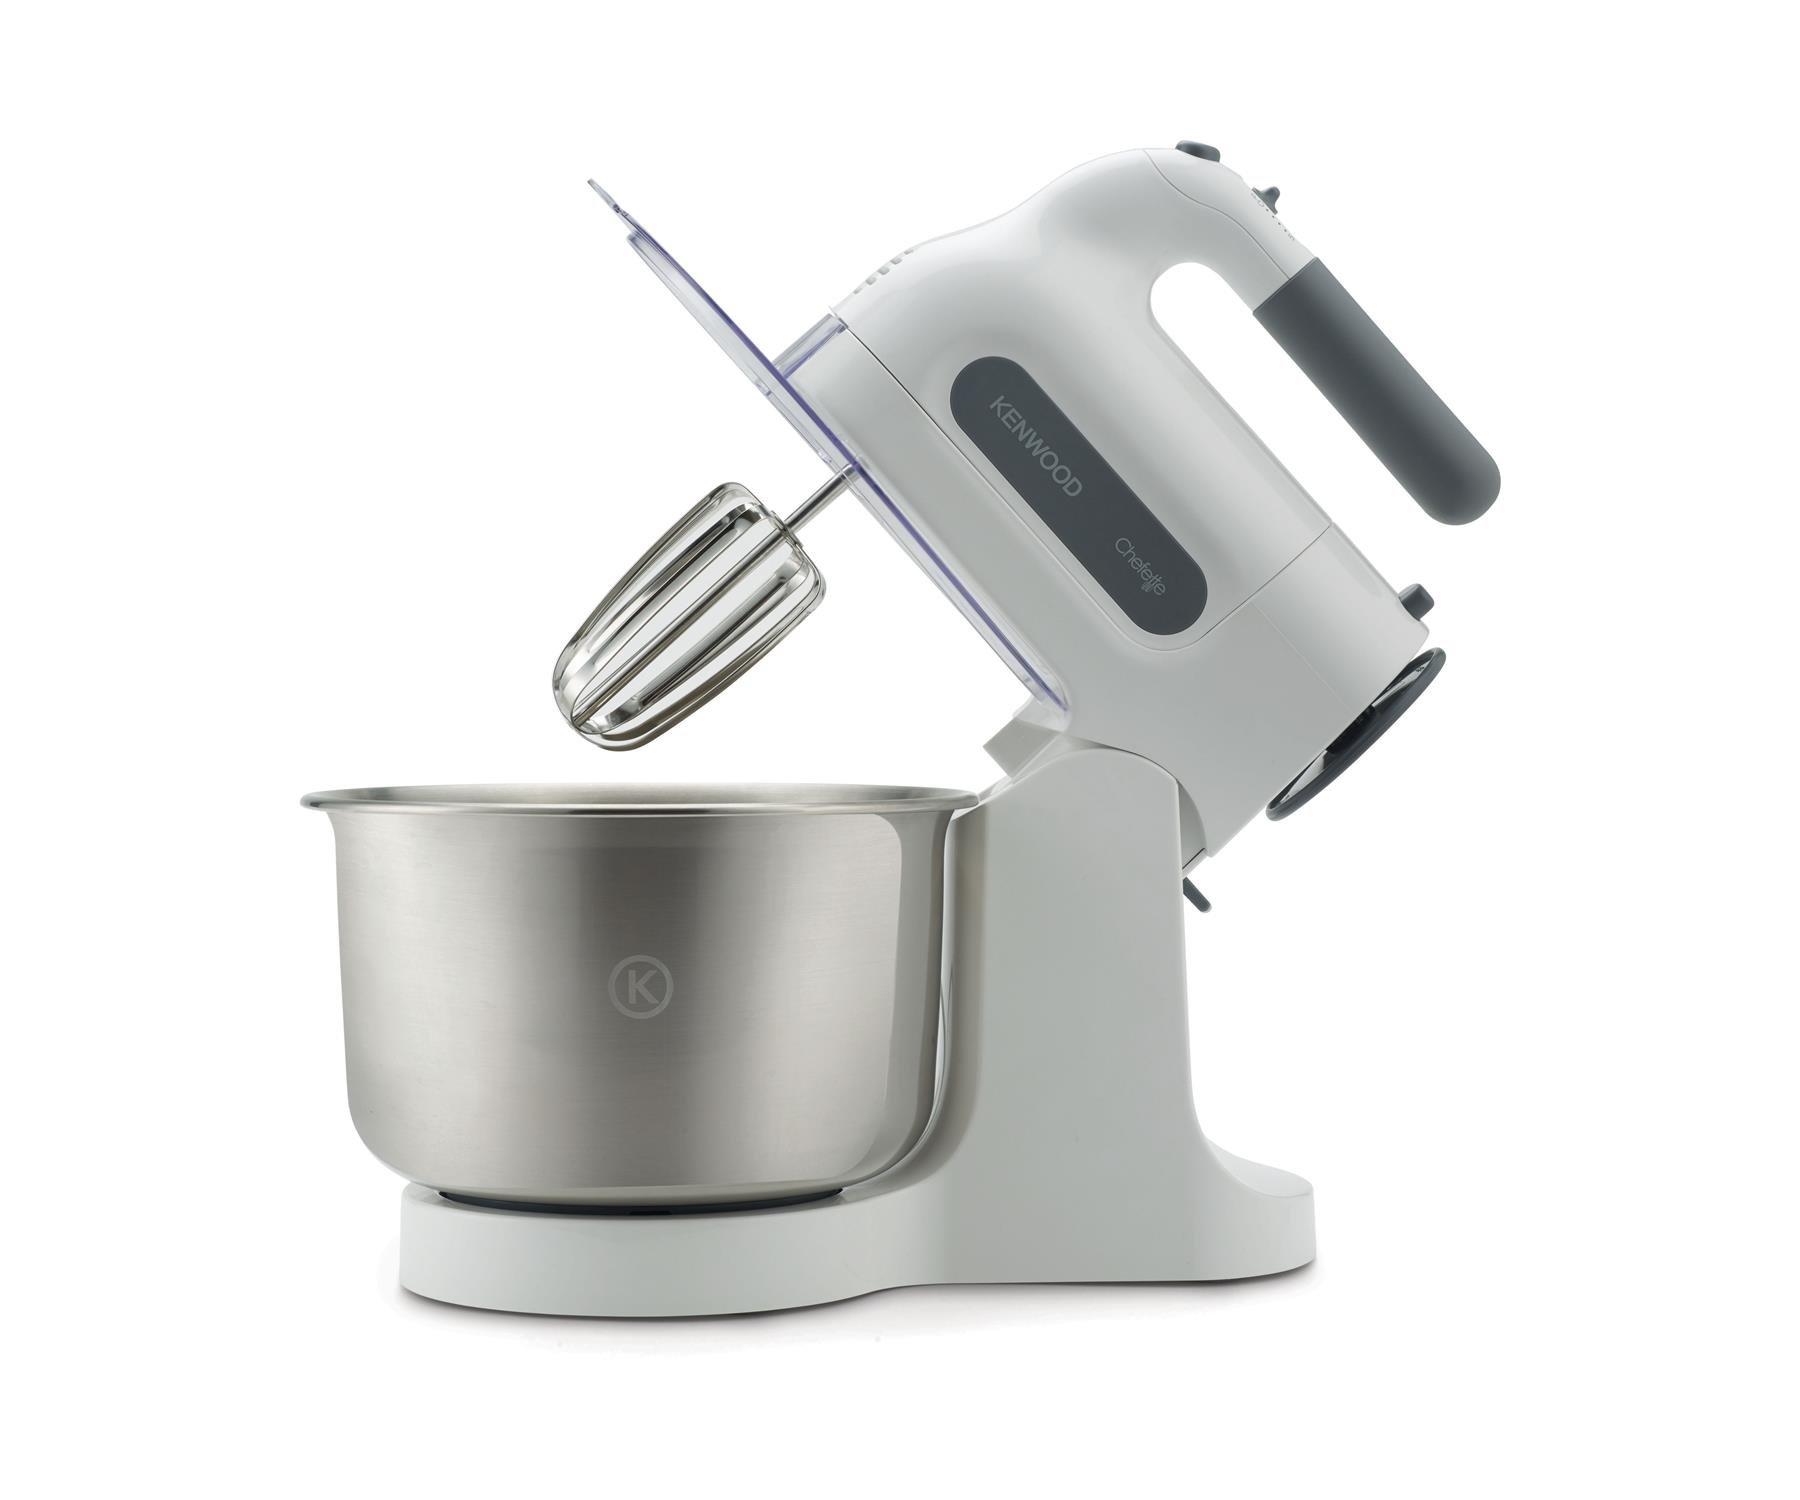 Cheffette Hand Mixer With Bowl